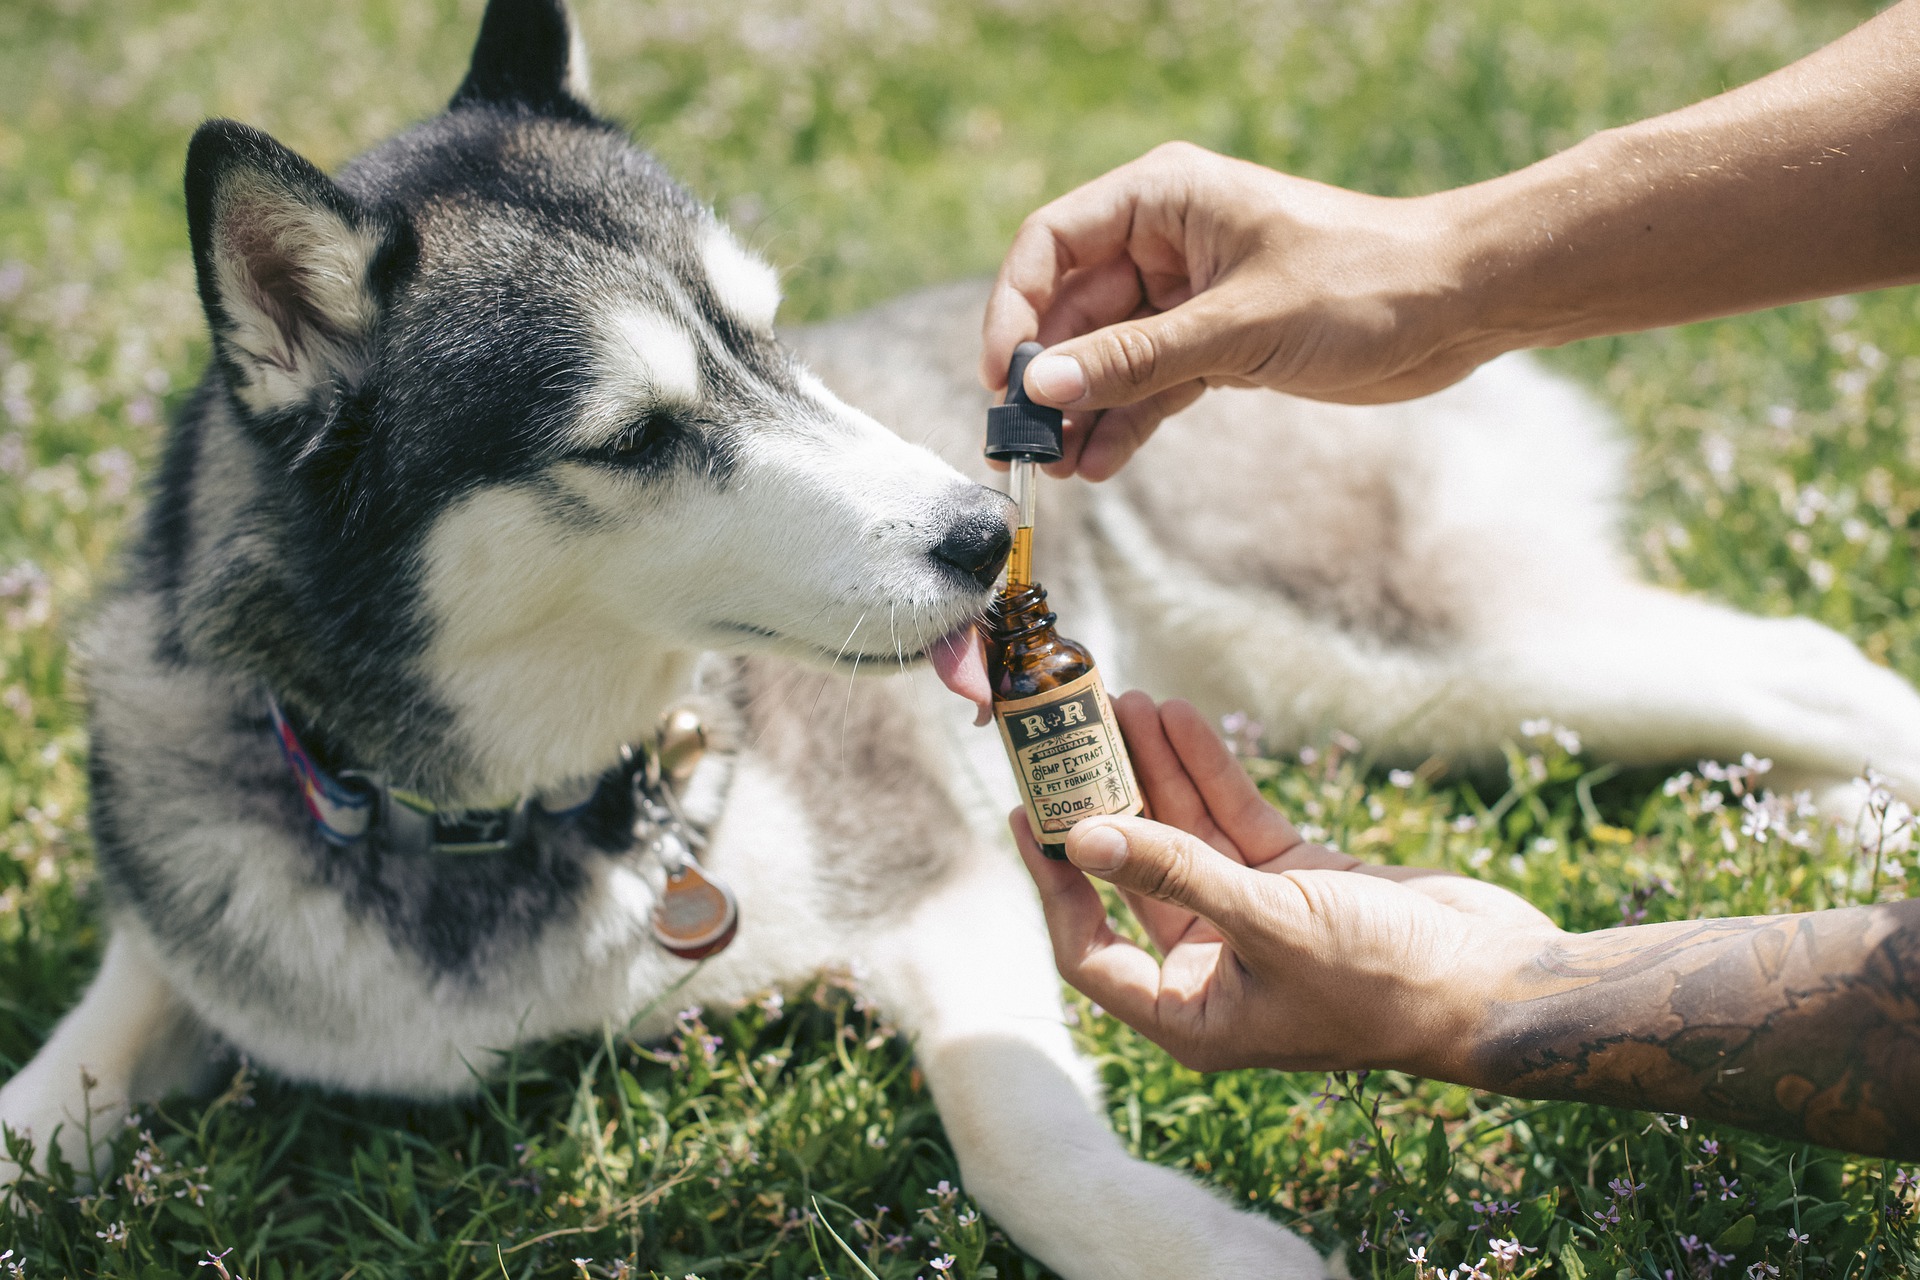 3 Things to Consider Before Giving CBD to Pets